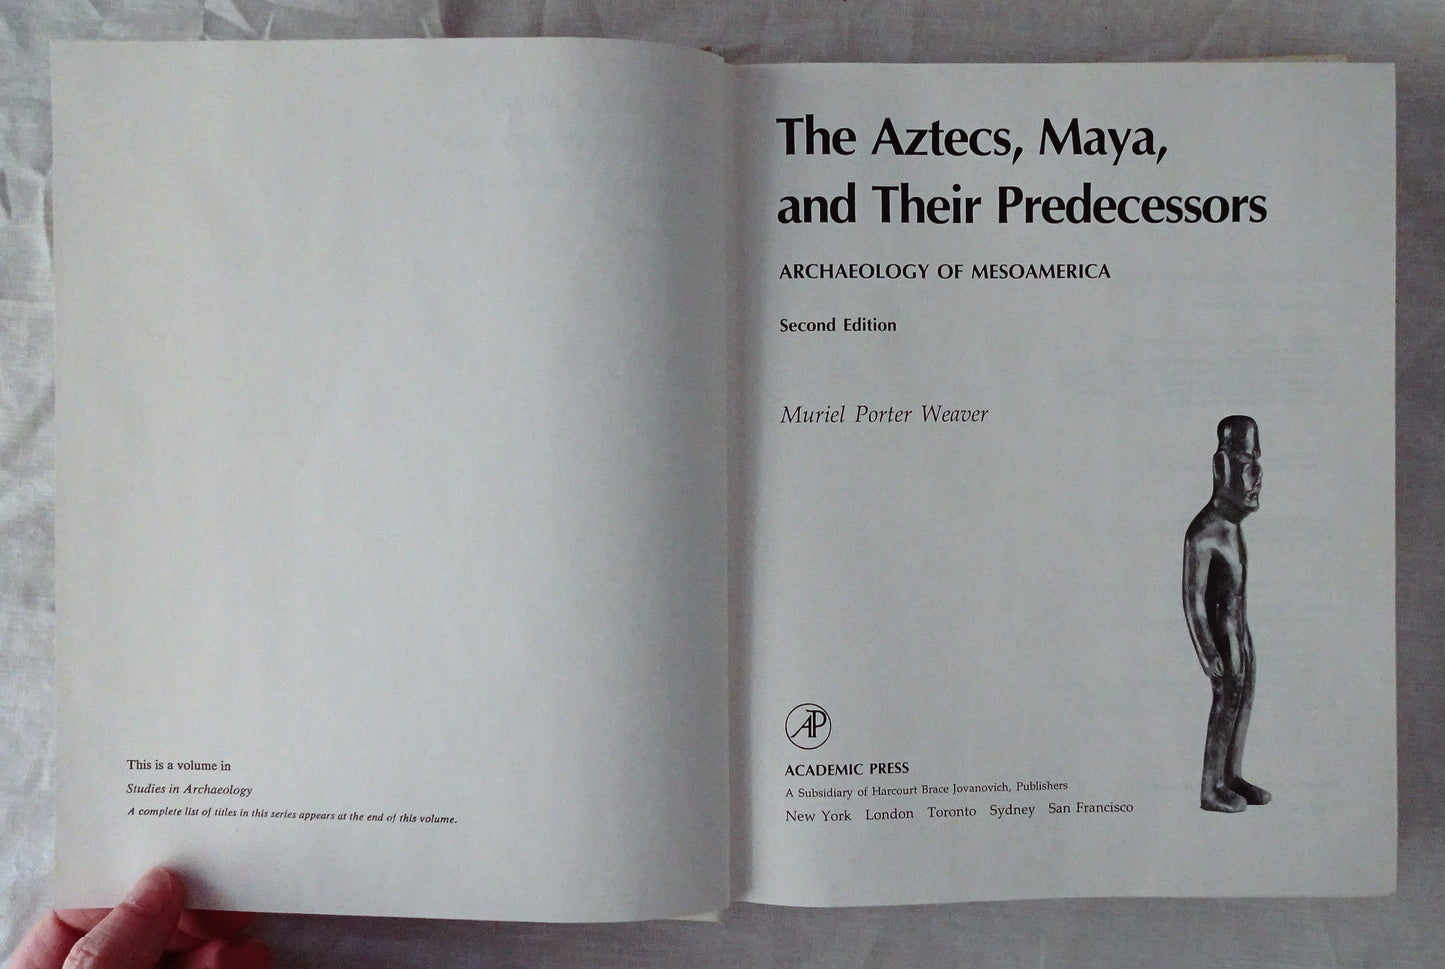 The Aztecs, Maya, and Their Predecessors by Muriel Porter Weaver